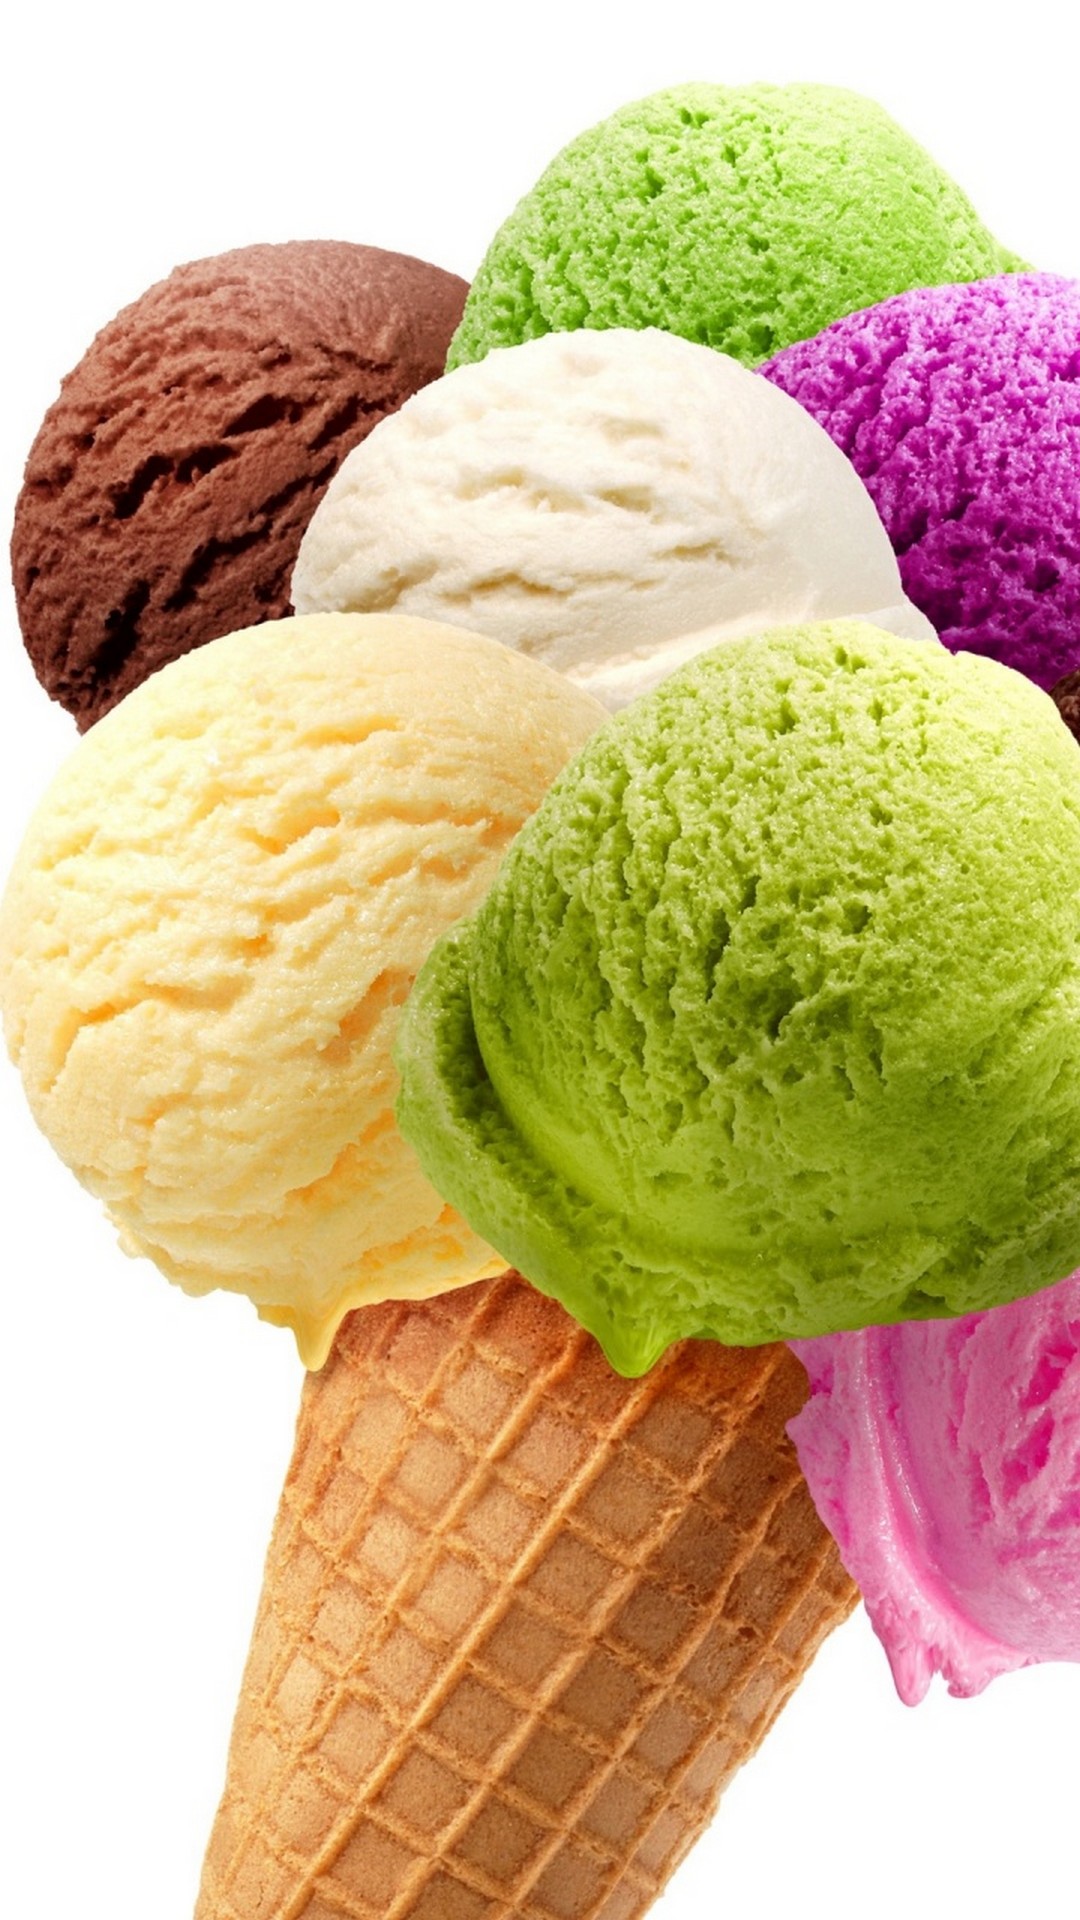 Cute Ice Cream iPhone Home Screen Wallpaper With high-resolution 1080X1920 pixel. You can set as wallpaper for Apple iPhone X, XS Max, XR, 8, 7, 6, SE, iPad. Enjoy and share your favorite HD wallpapers and background images